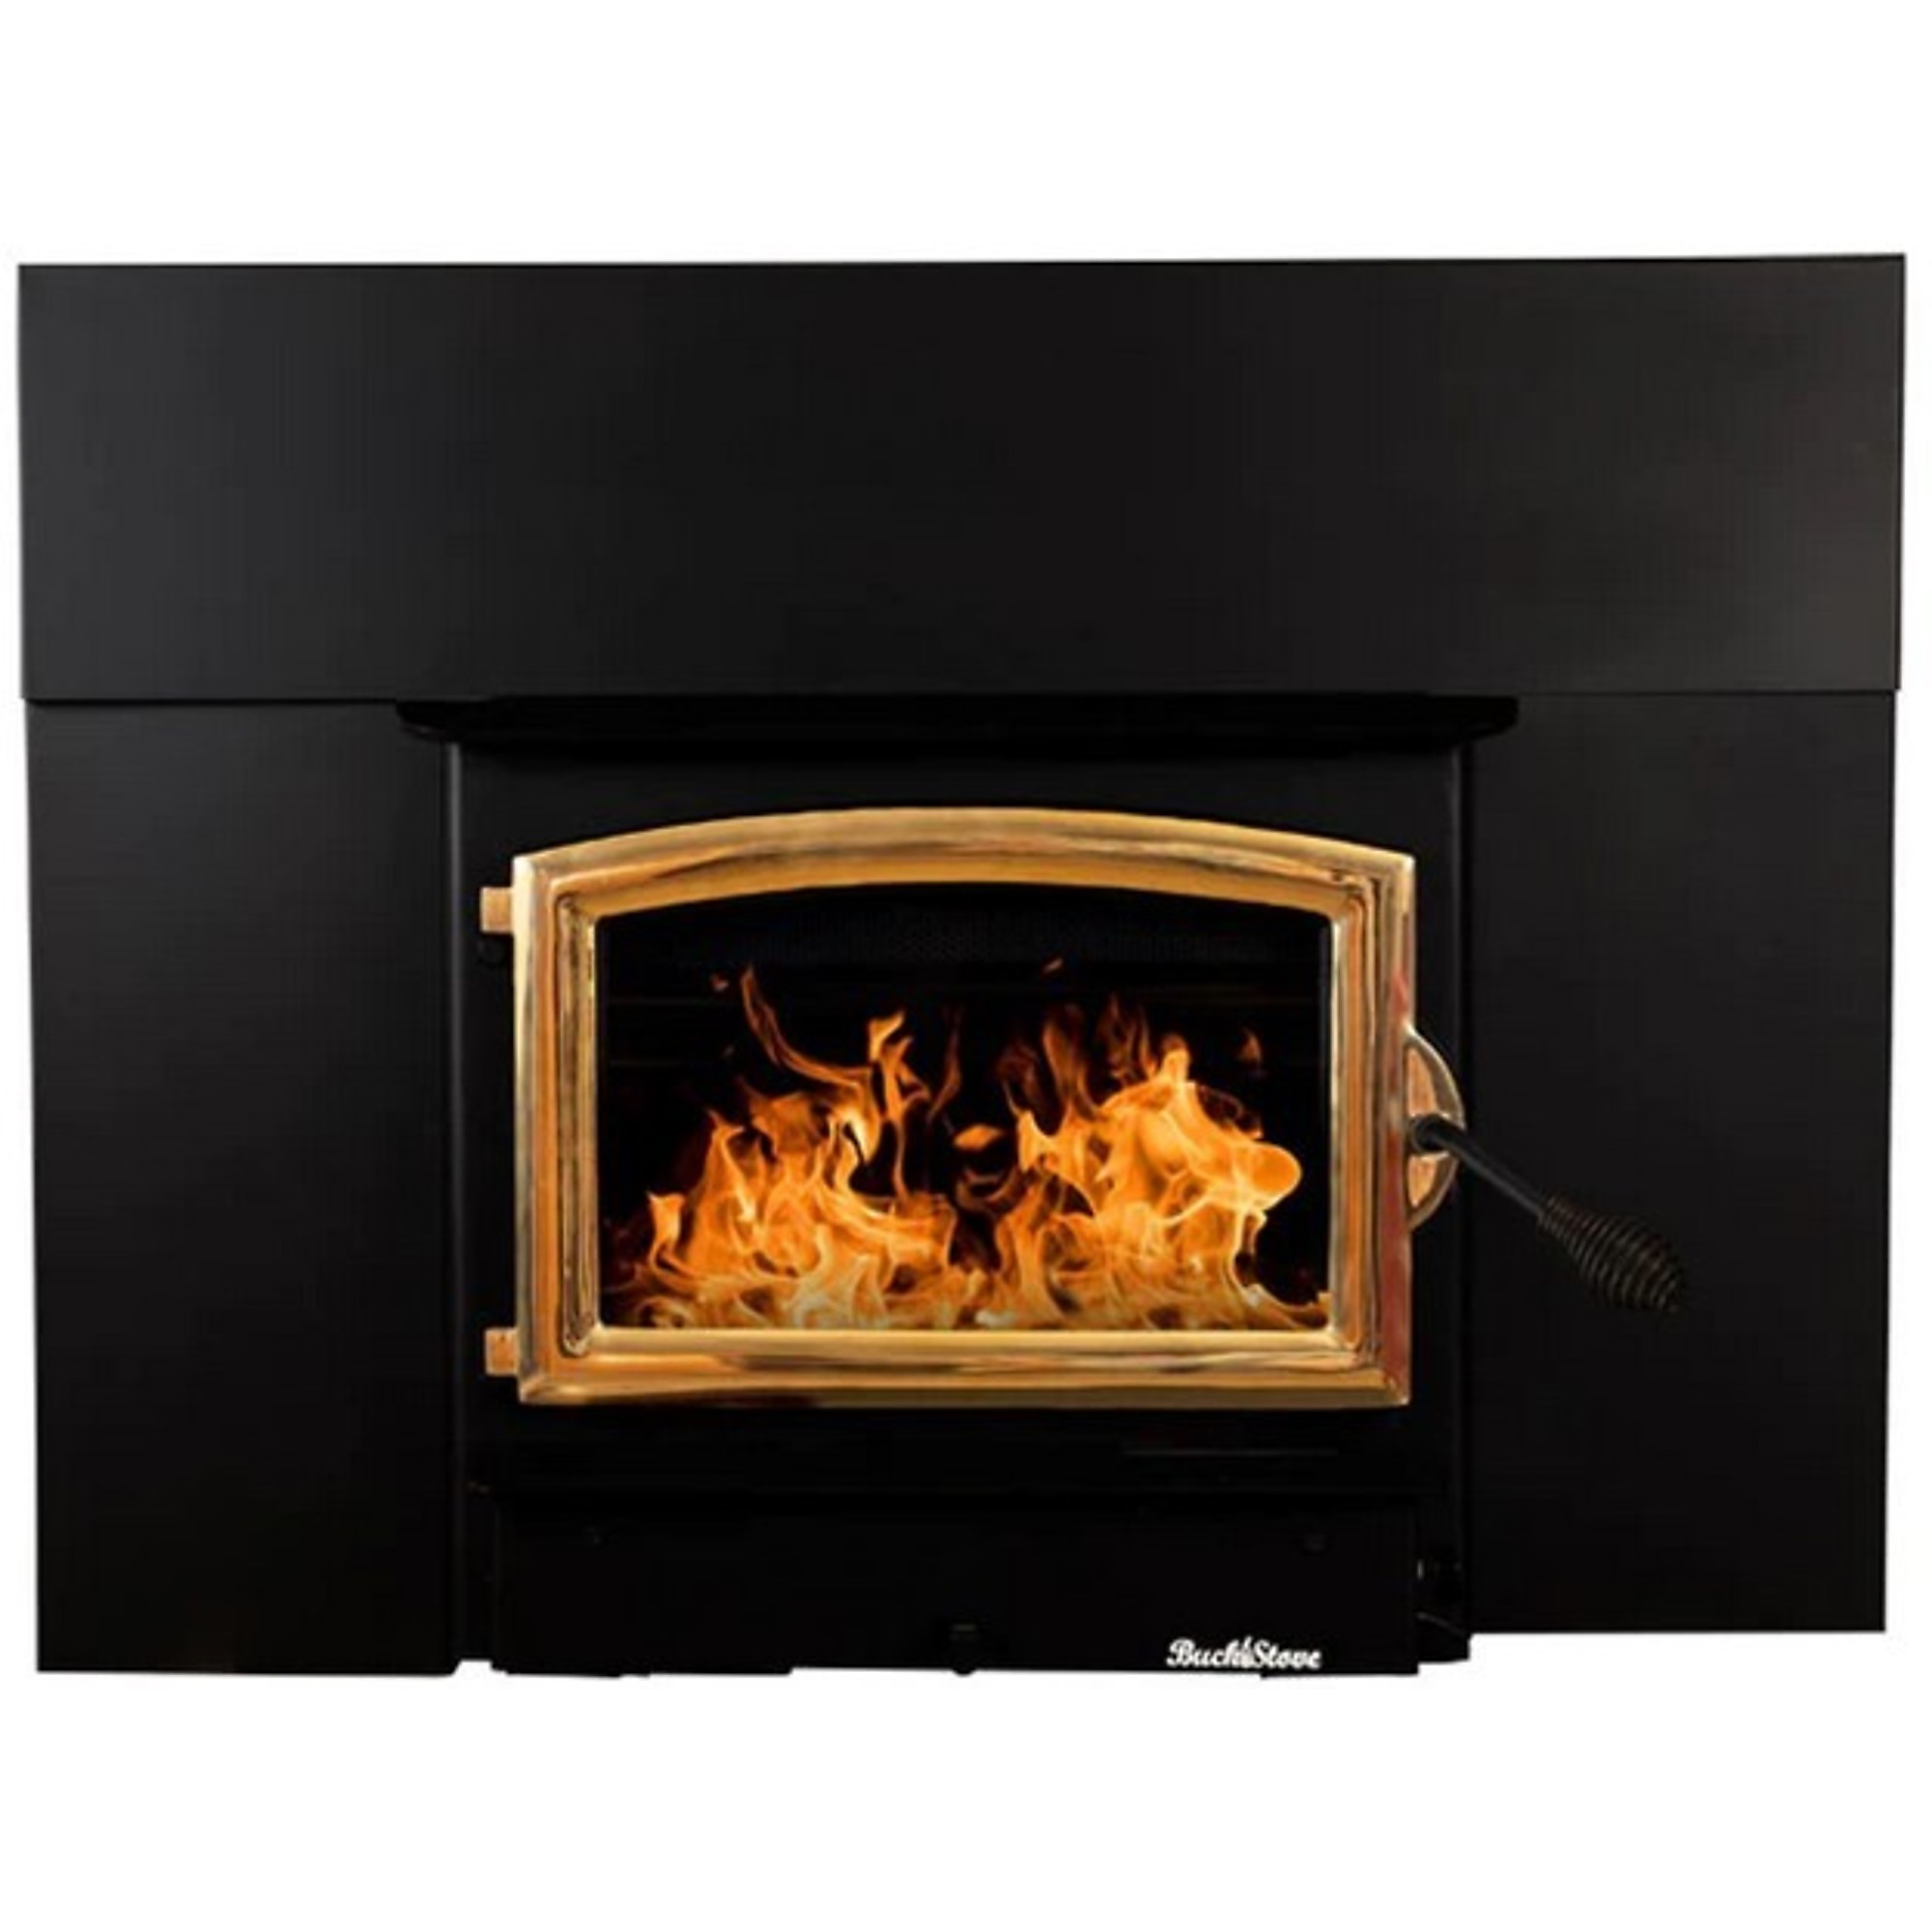 Buck, Wood Burning Insert with Gold Door and Blower, Heat Output 28901 Btu/hour, Heating Capability 1800 ftÂ², Model FP 21GSI